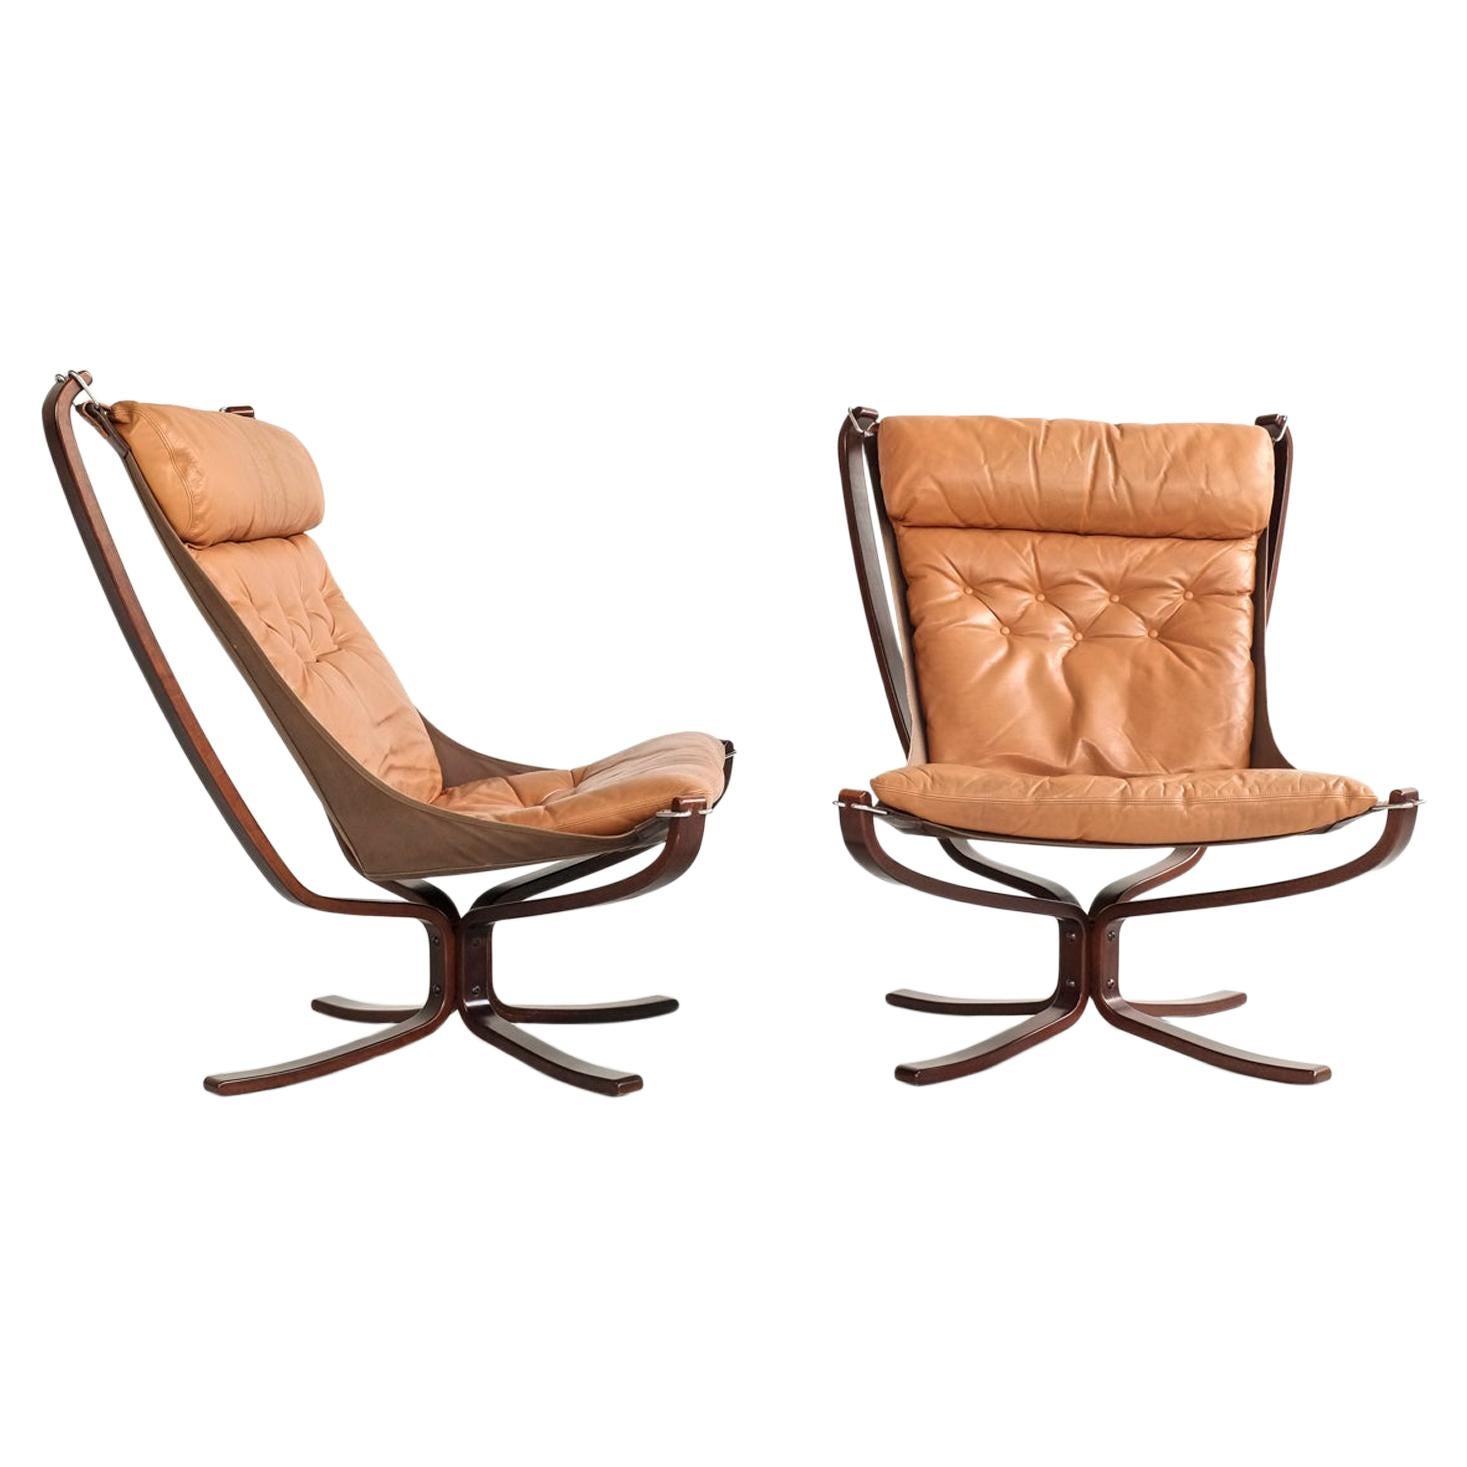 Midcentury Pair of High-Back Falcon Chairs by Sigurd Ressell for Vatne Møbler